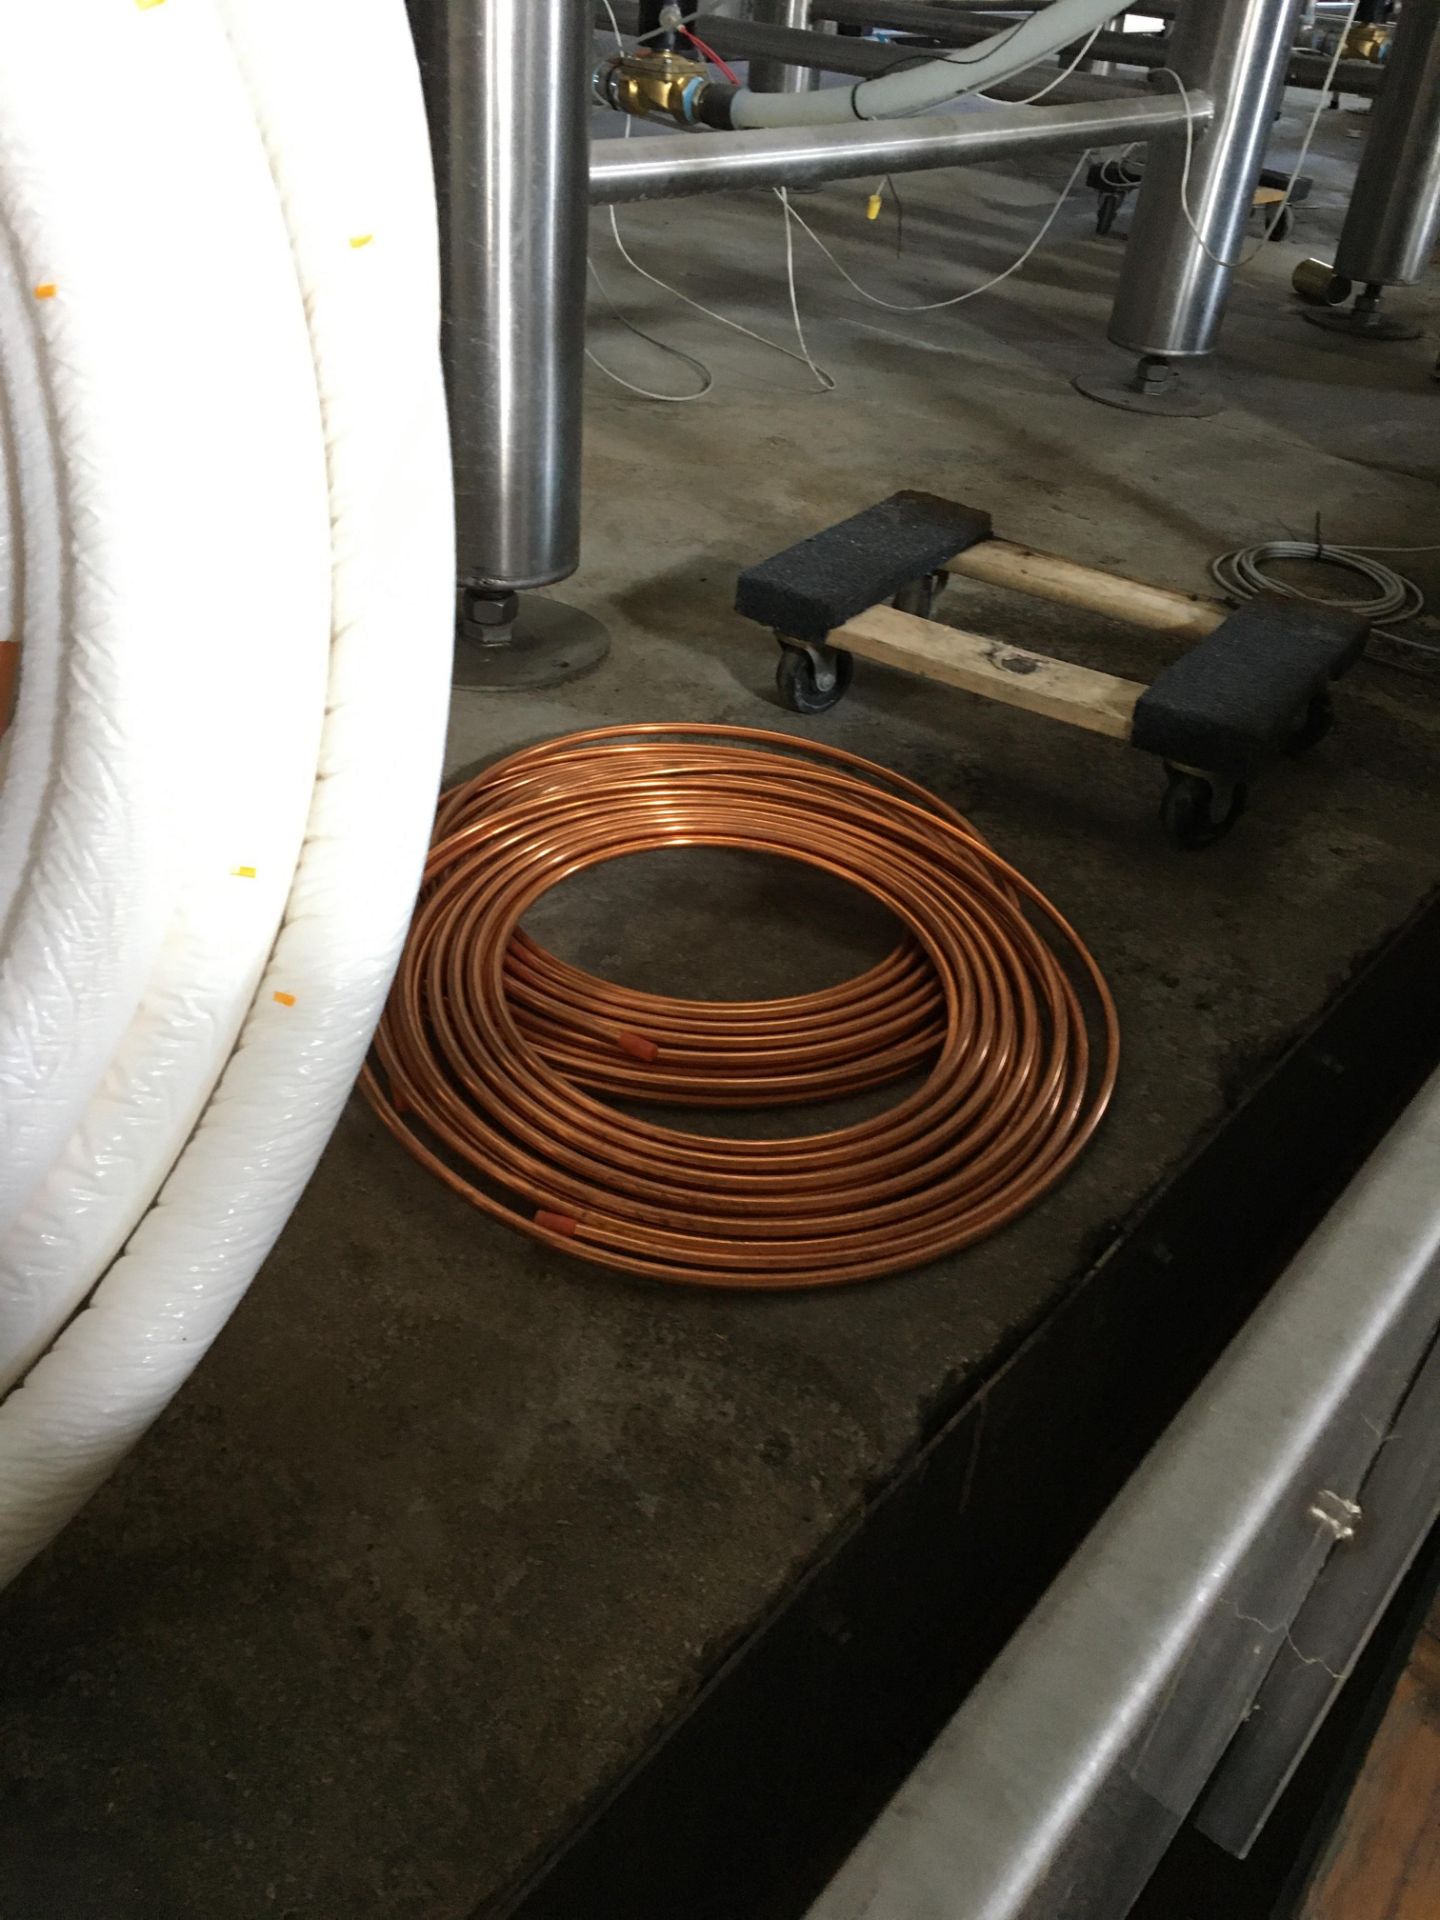 Approx. 500 Feet of Copper Pipe, Copper Pipe; only the copper pipe to do with the brewery - Image 27 of 29